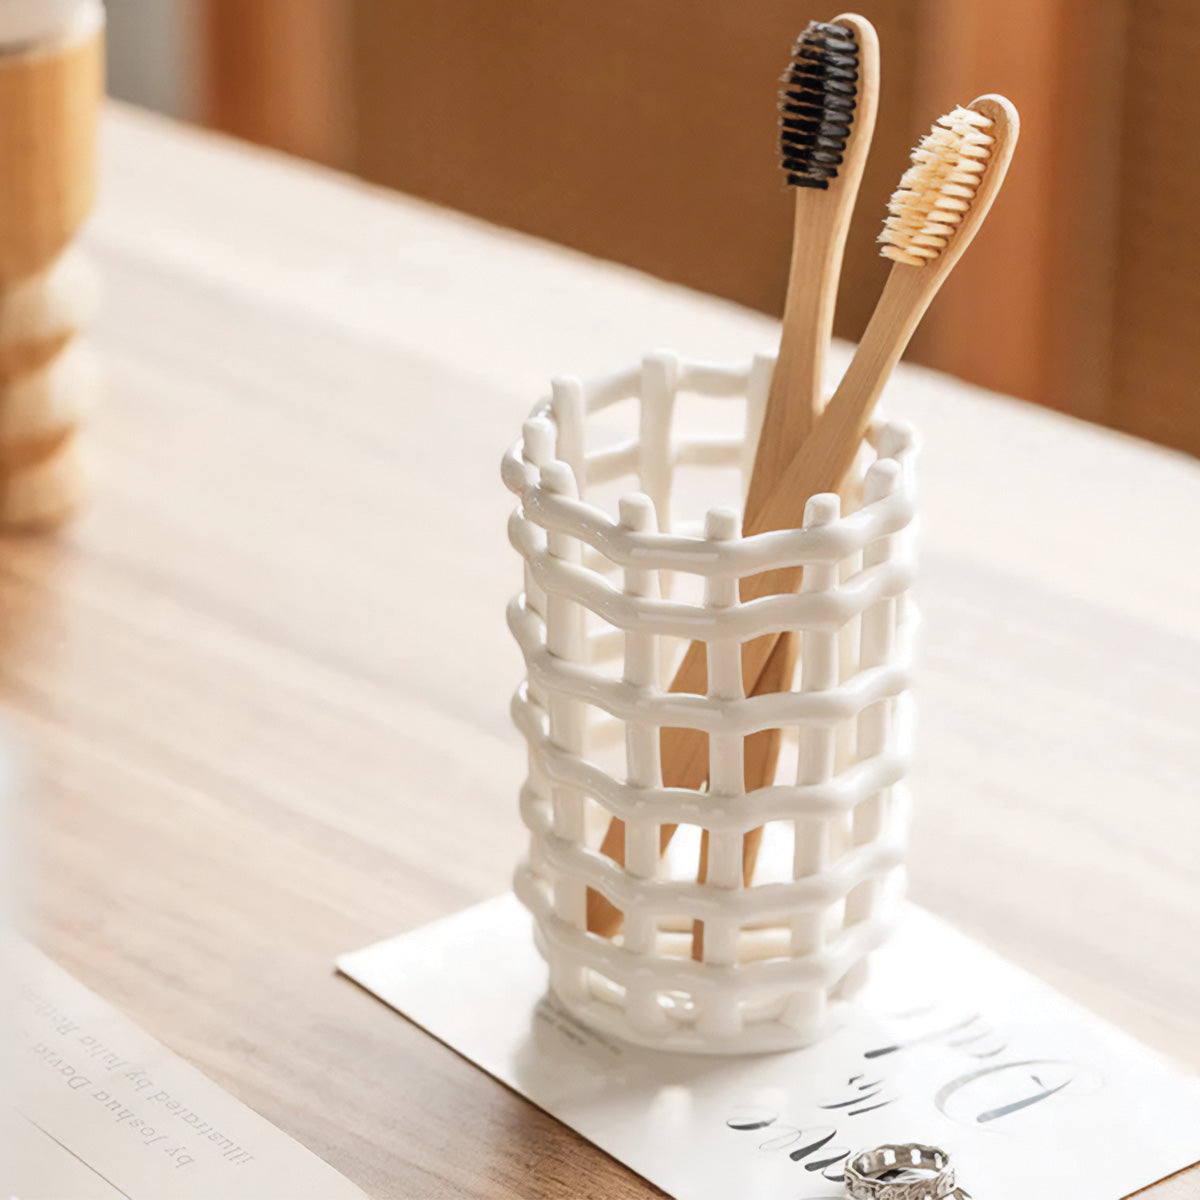 Forma Toothbrush Cup